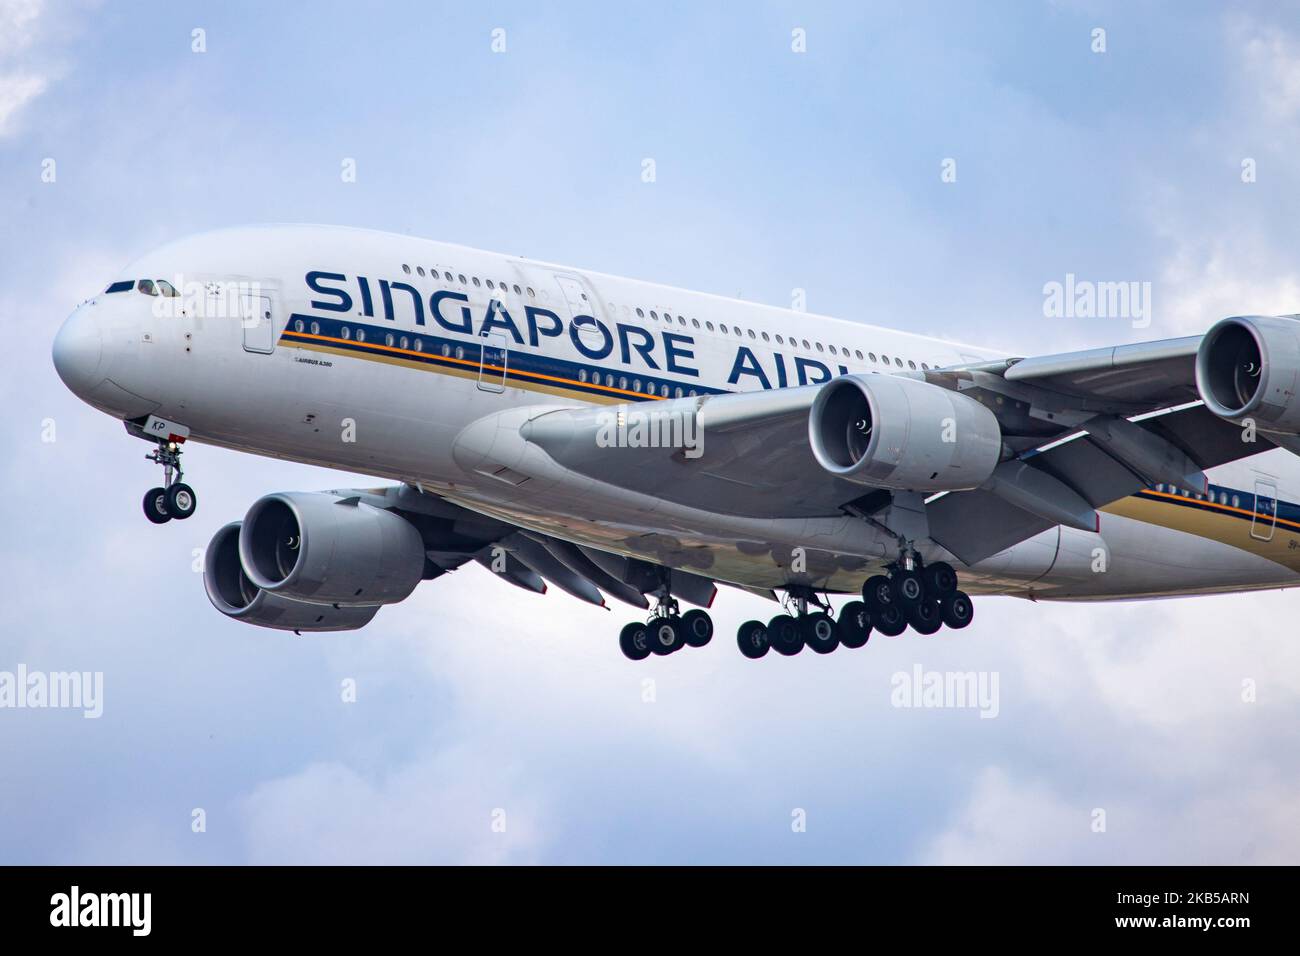 Singapore Airlines Airbus A380 double decker aircraft seen on final approach landing, during a summer day with clouds, at London Heathrow International Airport LHR EGLL on 23 August 2019. The wide body airplane has 4x RR Trent 970 jet engines and registration 9V-SKP. Singapore Airlines SQ SIA is the flag carrier airline of Singapore and is based with hub at Changi Airport SIN WSSS offering daily connections to the British capital. ranked as the world's best airline in 2018 and is member of Star Alliance aviation alliance. (Photo by Nicolas Economou/NurPhoto) Stock Photo